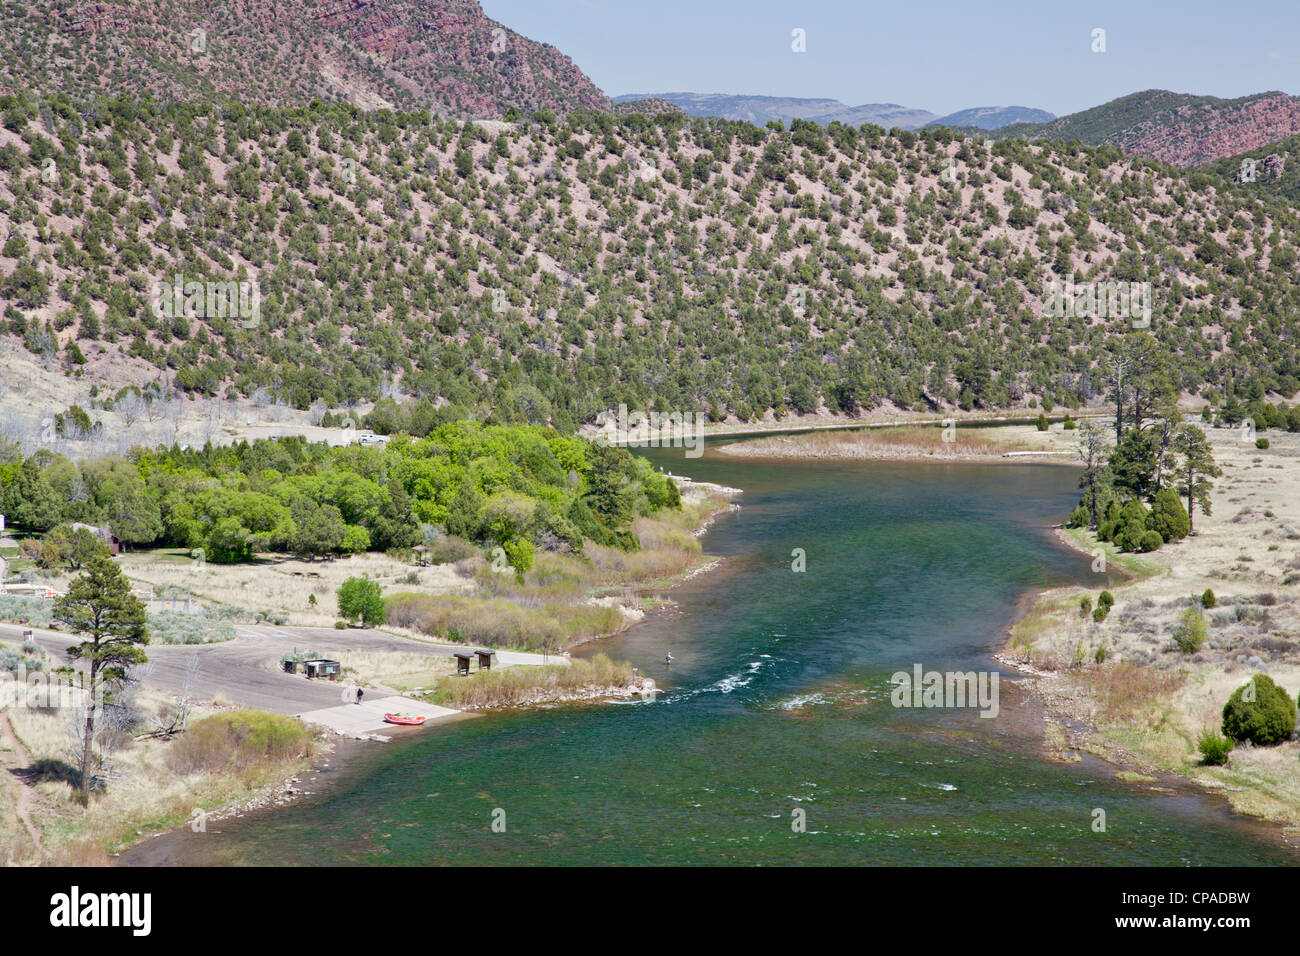 Green River at Little Hole, Utah, below Flaming Gorge Dam, boat ramp with a raft and fisherman, spring with fresh green colors Stock Photo